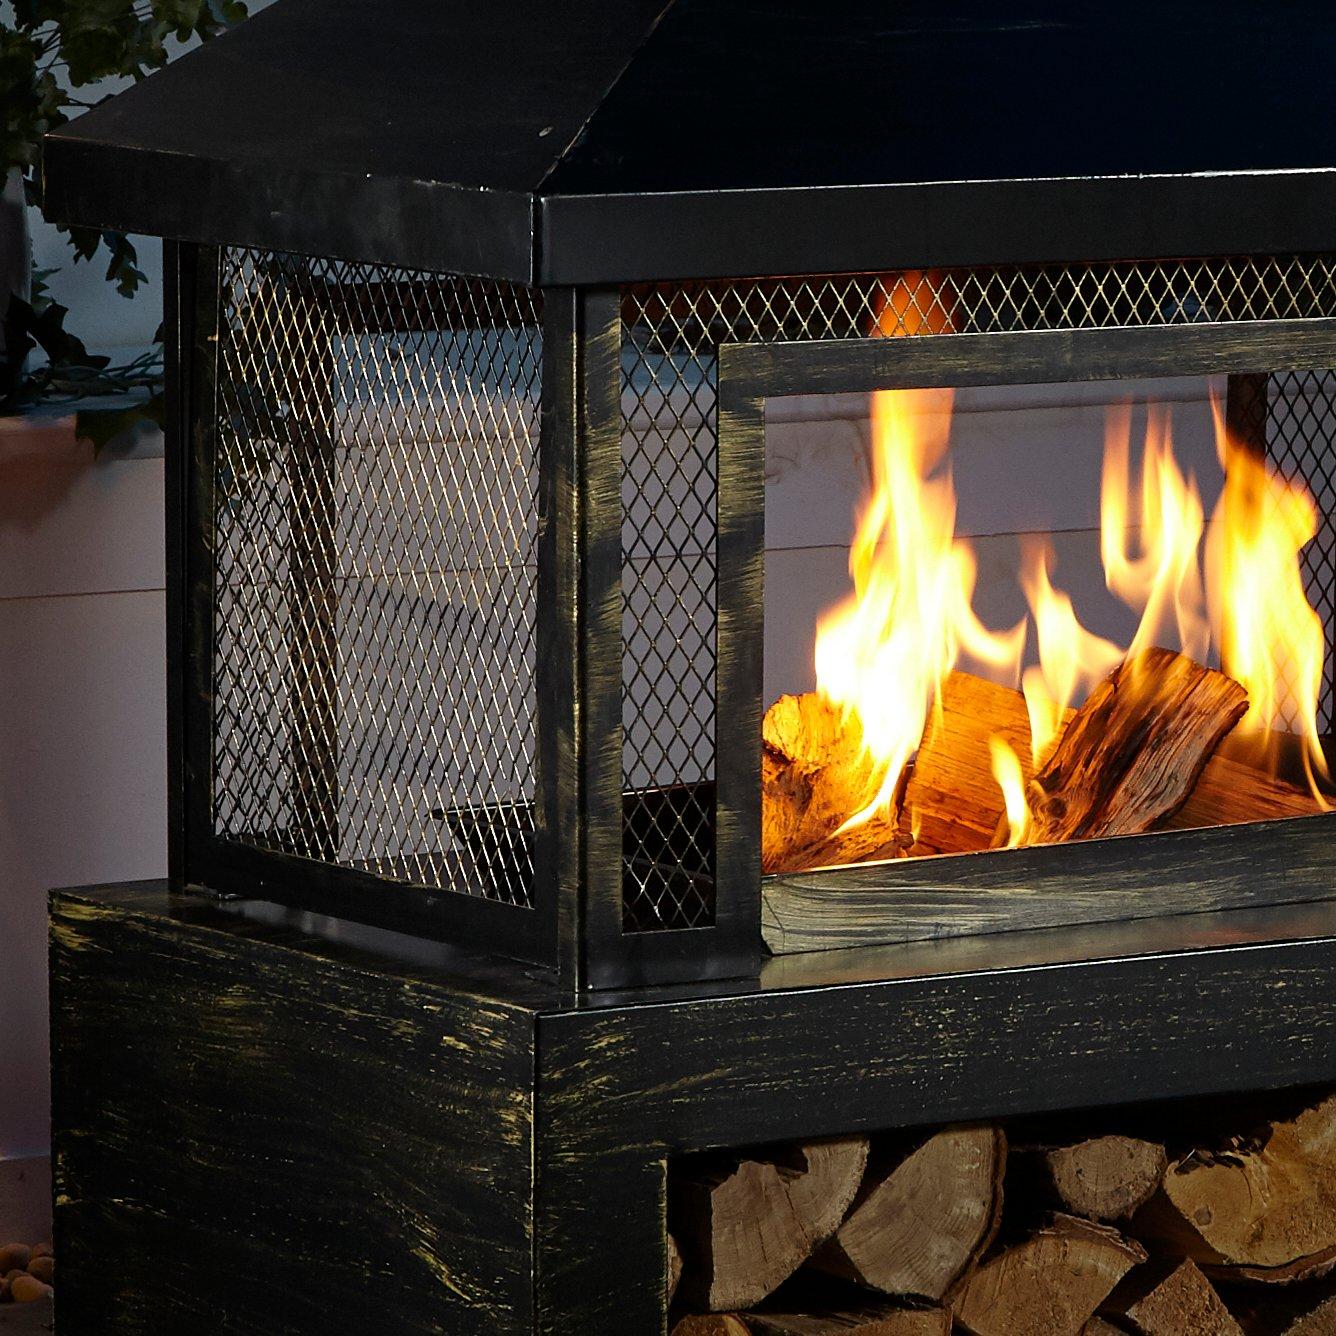 Image of Save 40%: Black Outdoor Fire Pit

